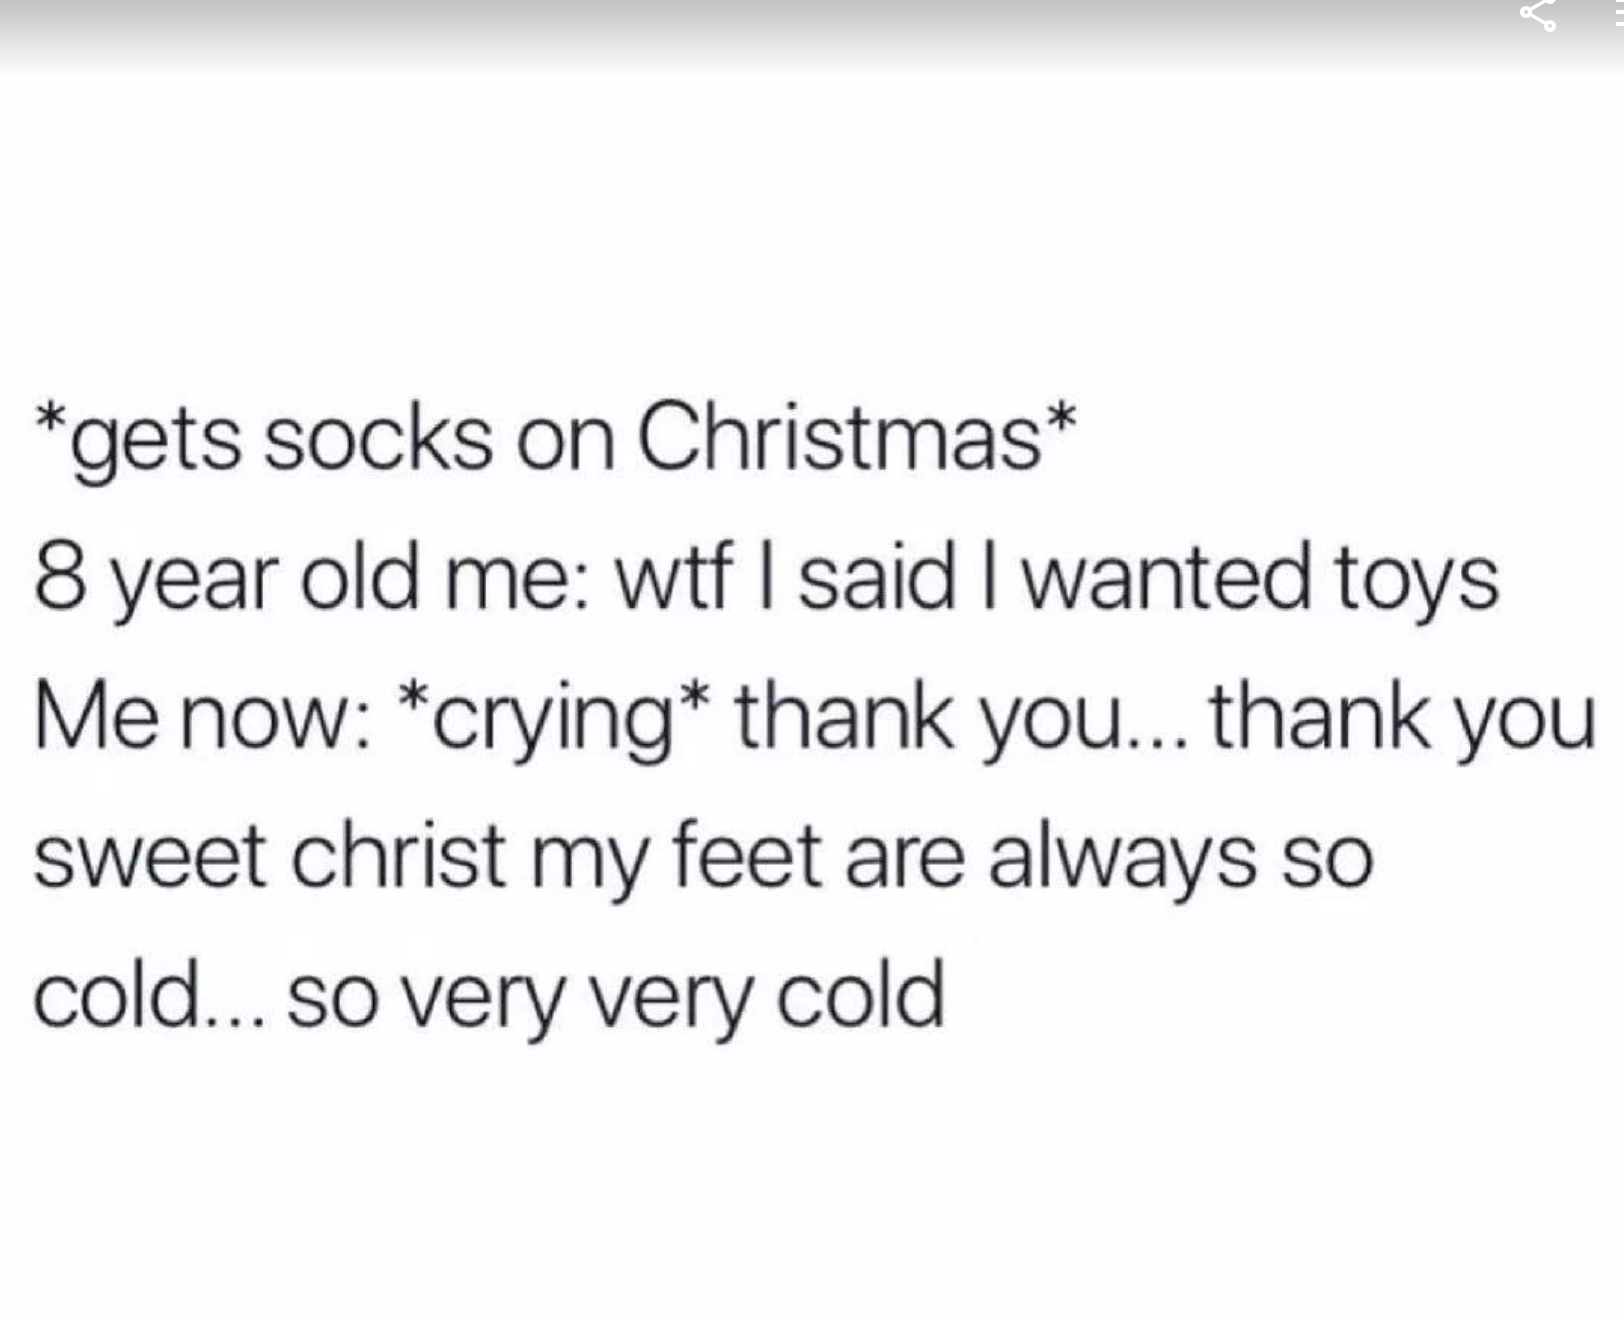 introduction about solid waste management - gets socks on Christmas 8 year old me wtf I said I wanted toys Me now crying thank you... thank you sweet christ my feet are always so cold... so very very cold